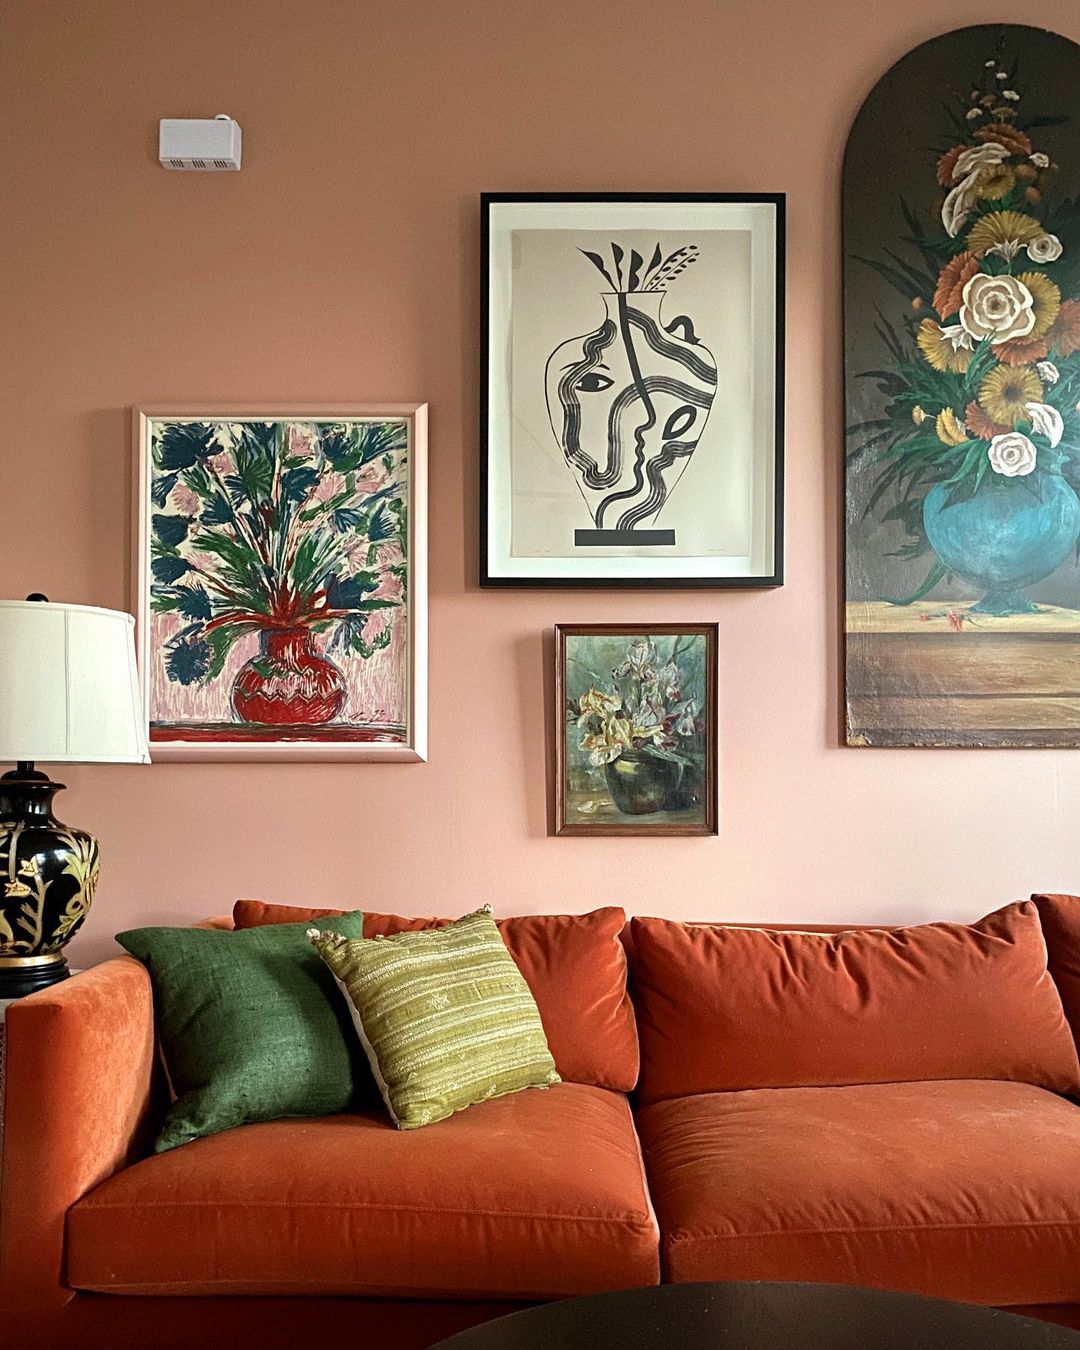 Feng Shui fire element interior design of an Orange couch against a gallery wall. Photo by instagram user @dabito